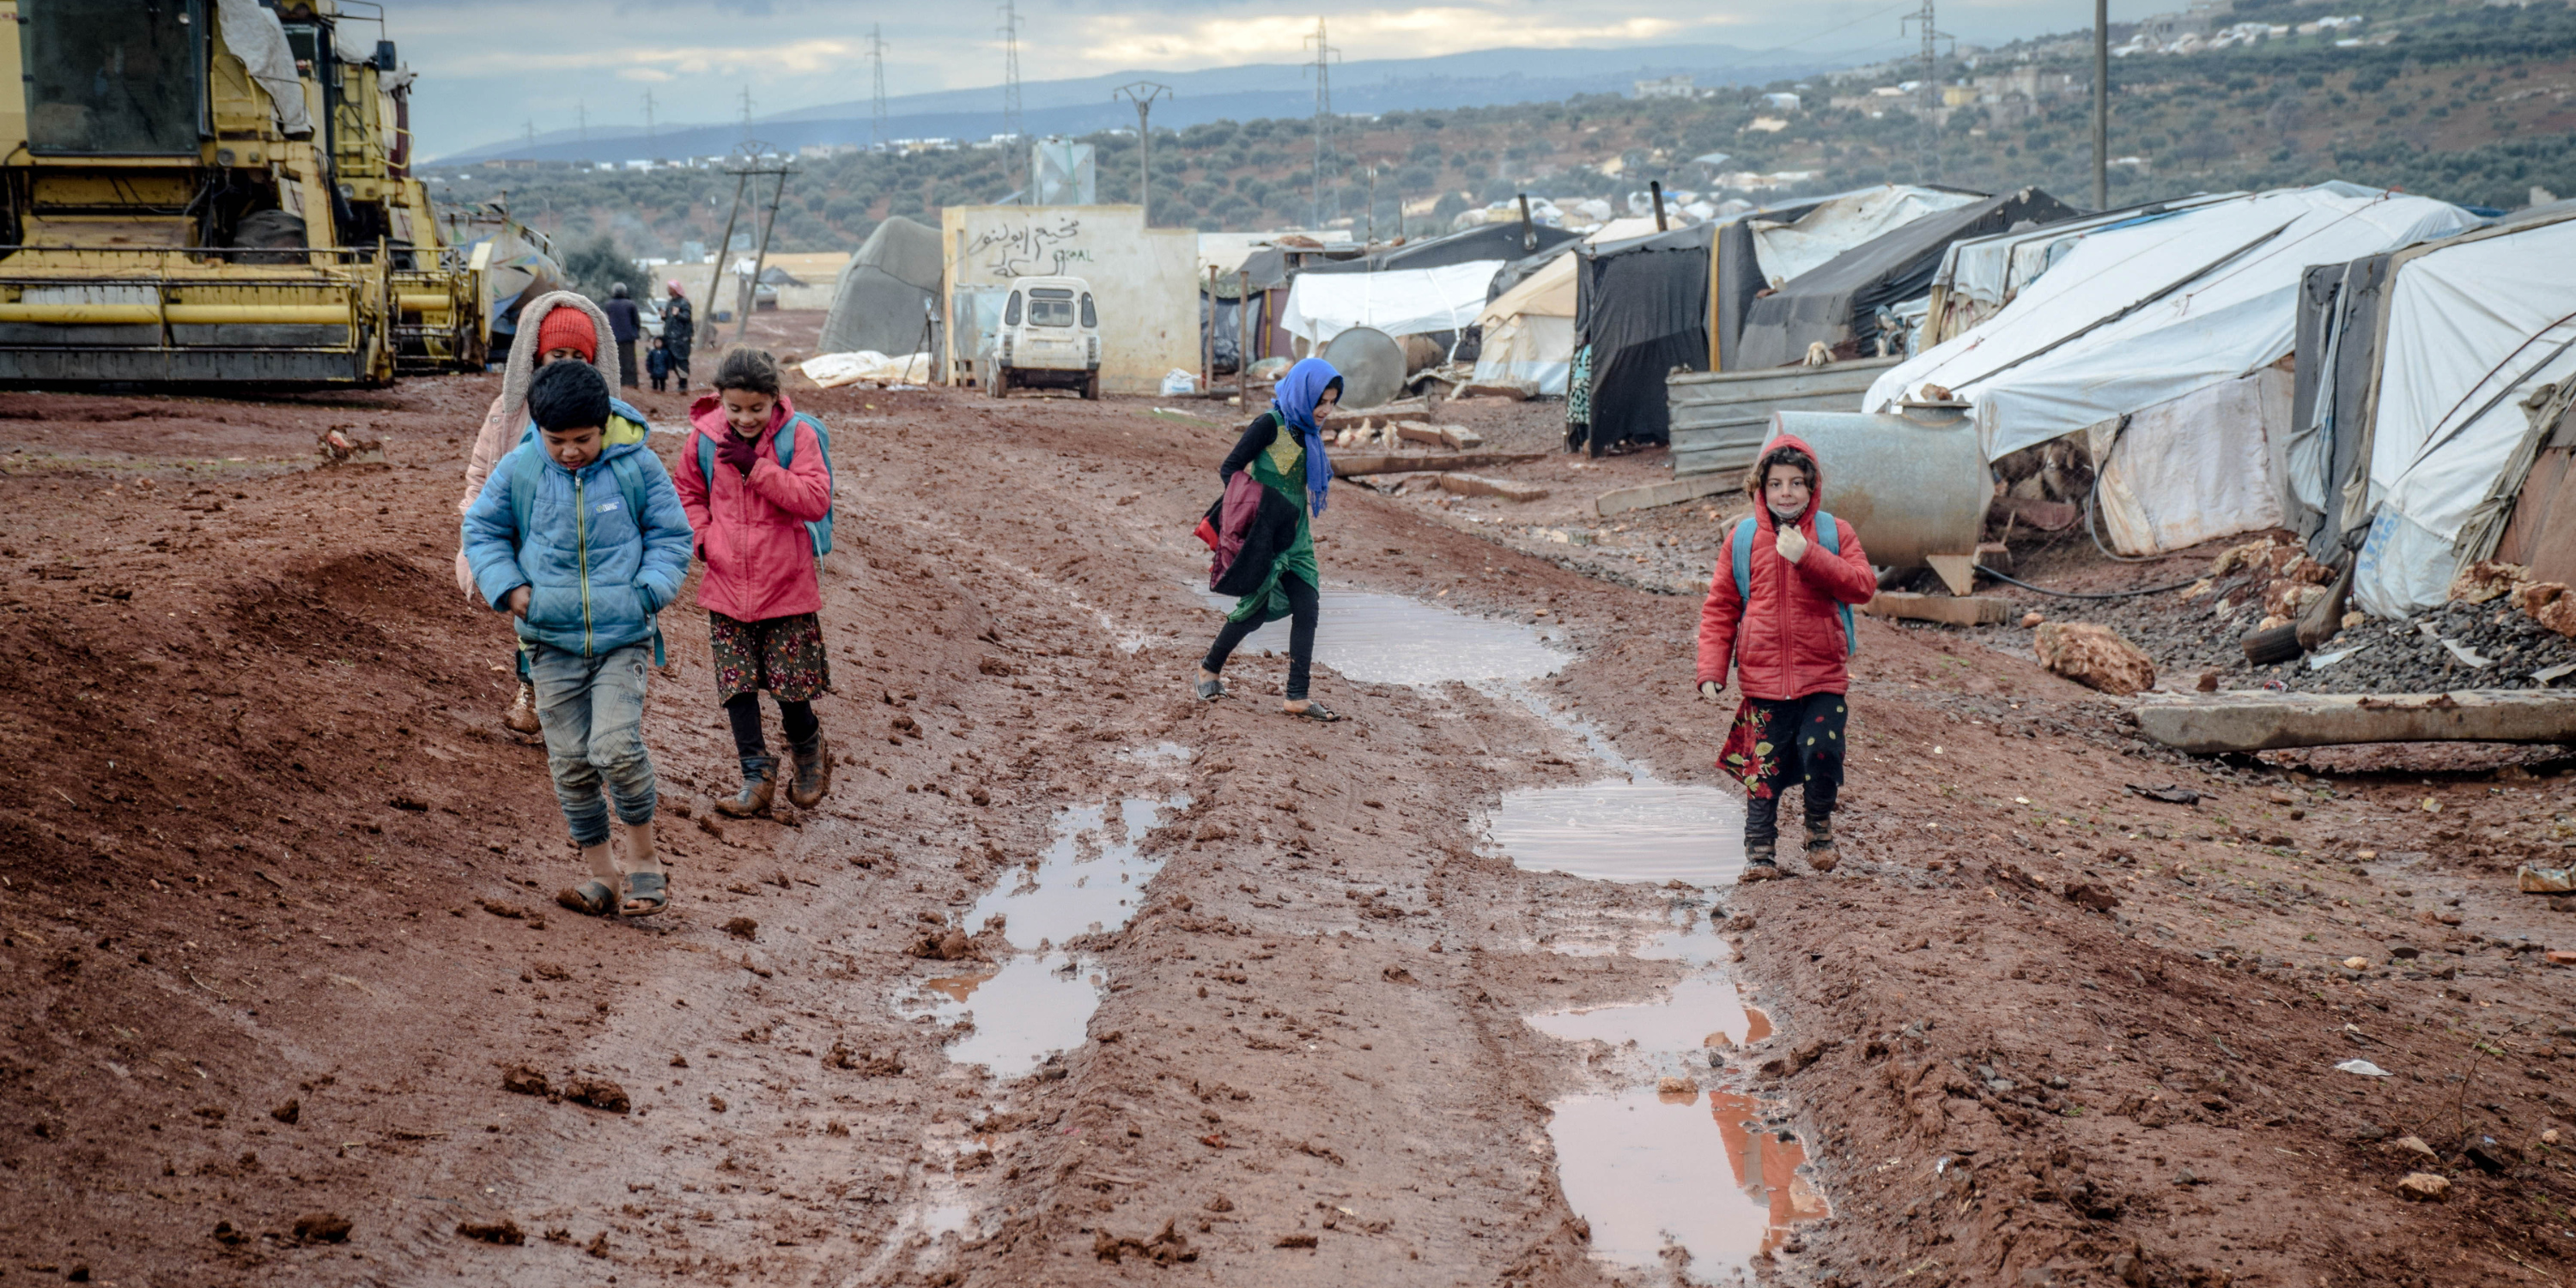 Children walking in muddy field, along shelters at refugee camp